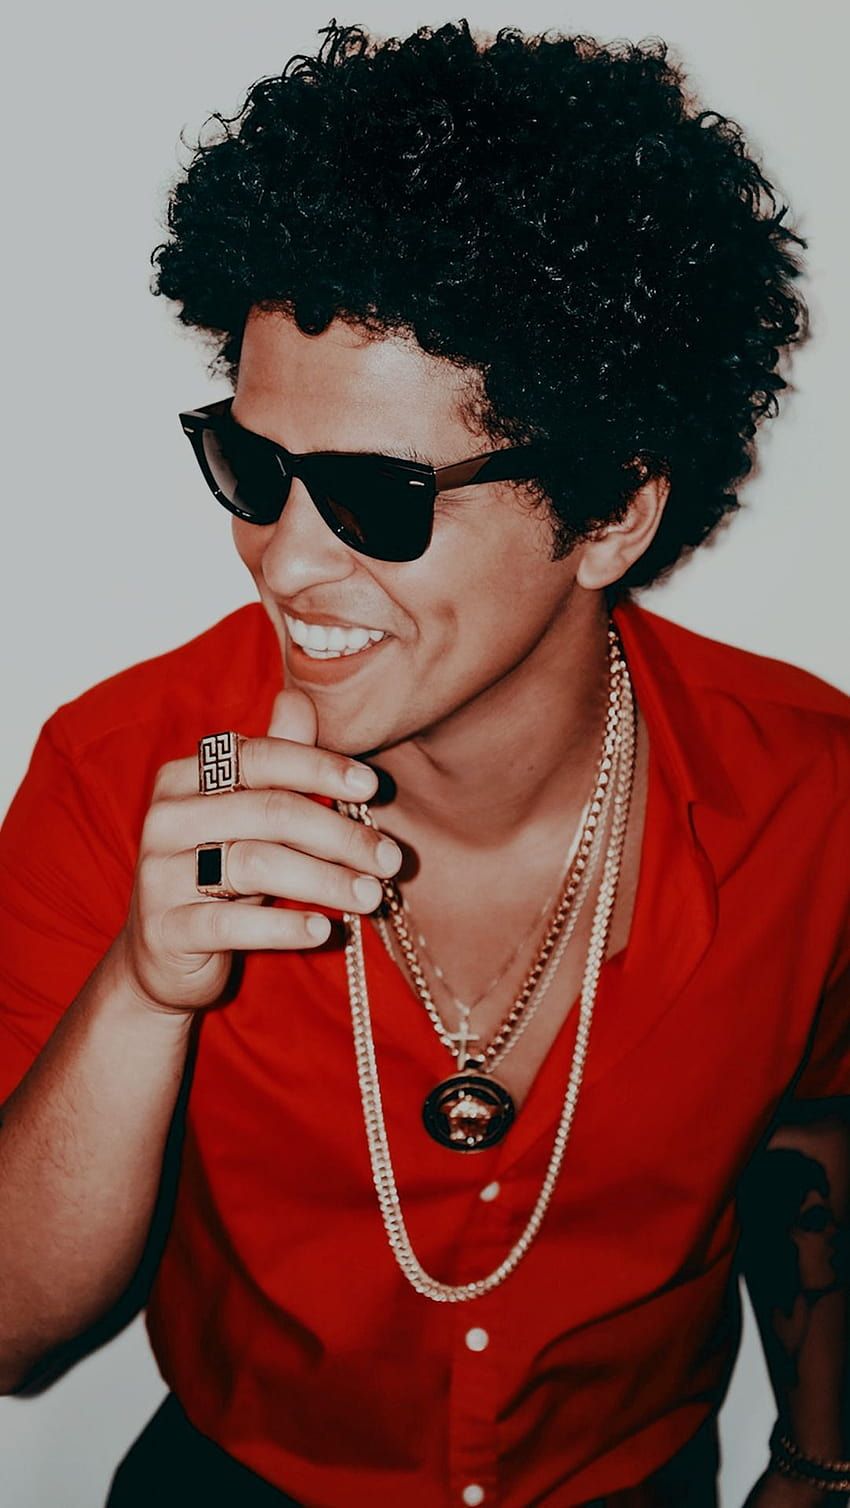 A man wearing sunglasses and holding his phone - Bruno Mars